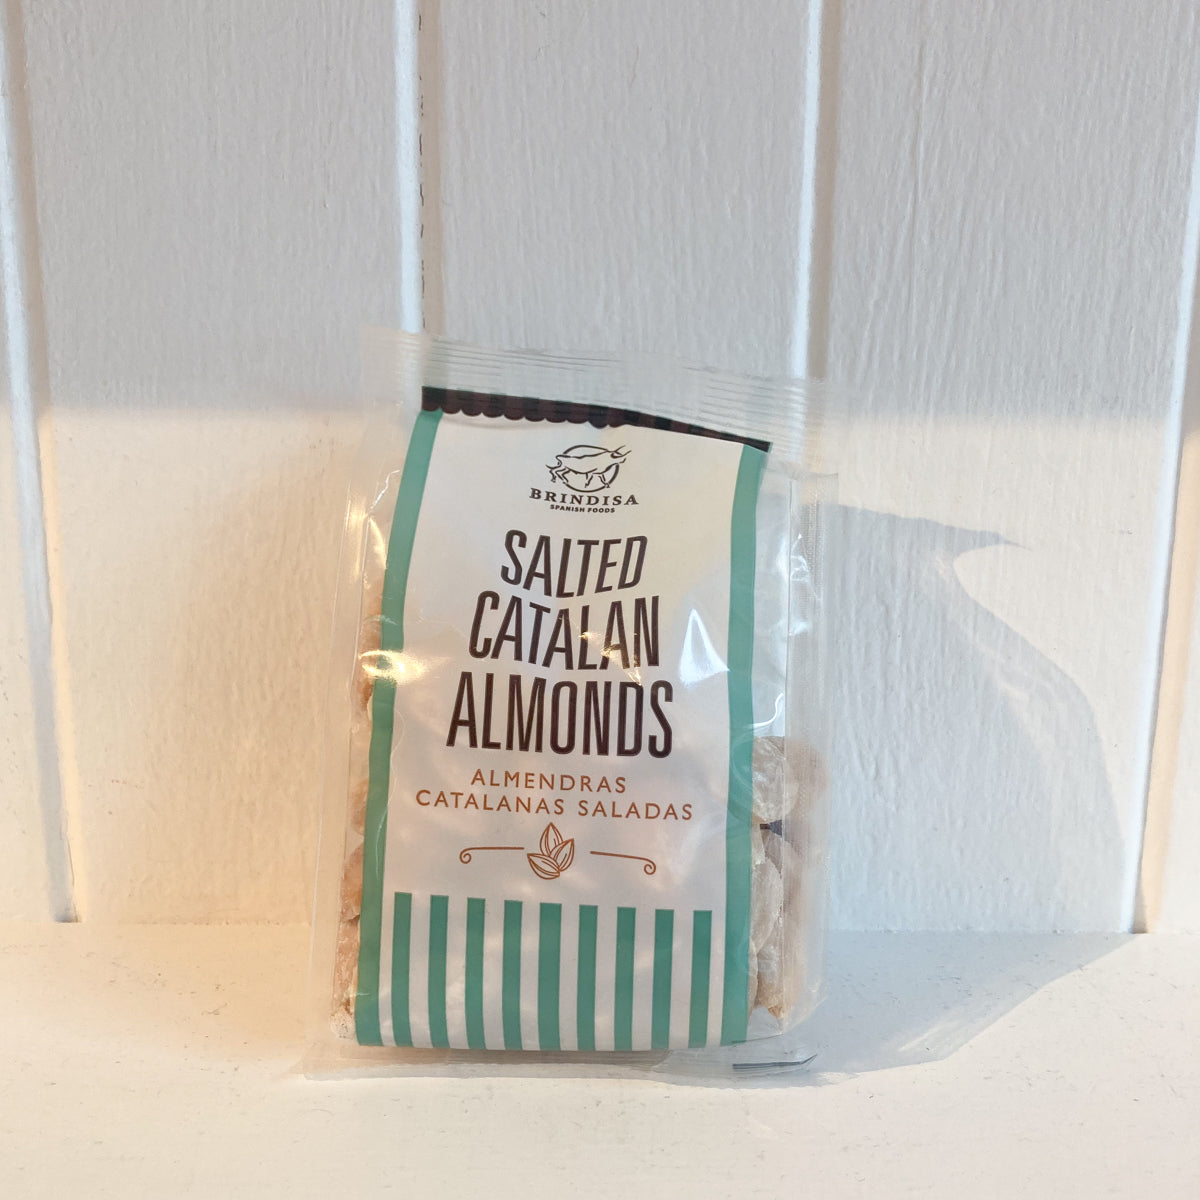 Salted Catalan almonds